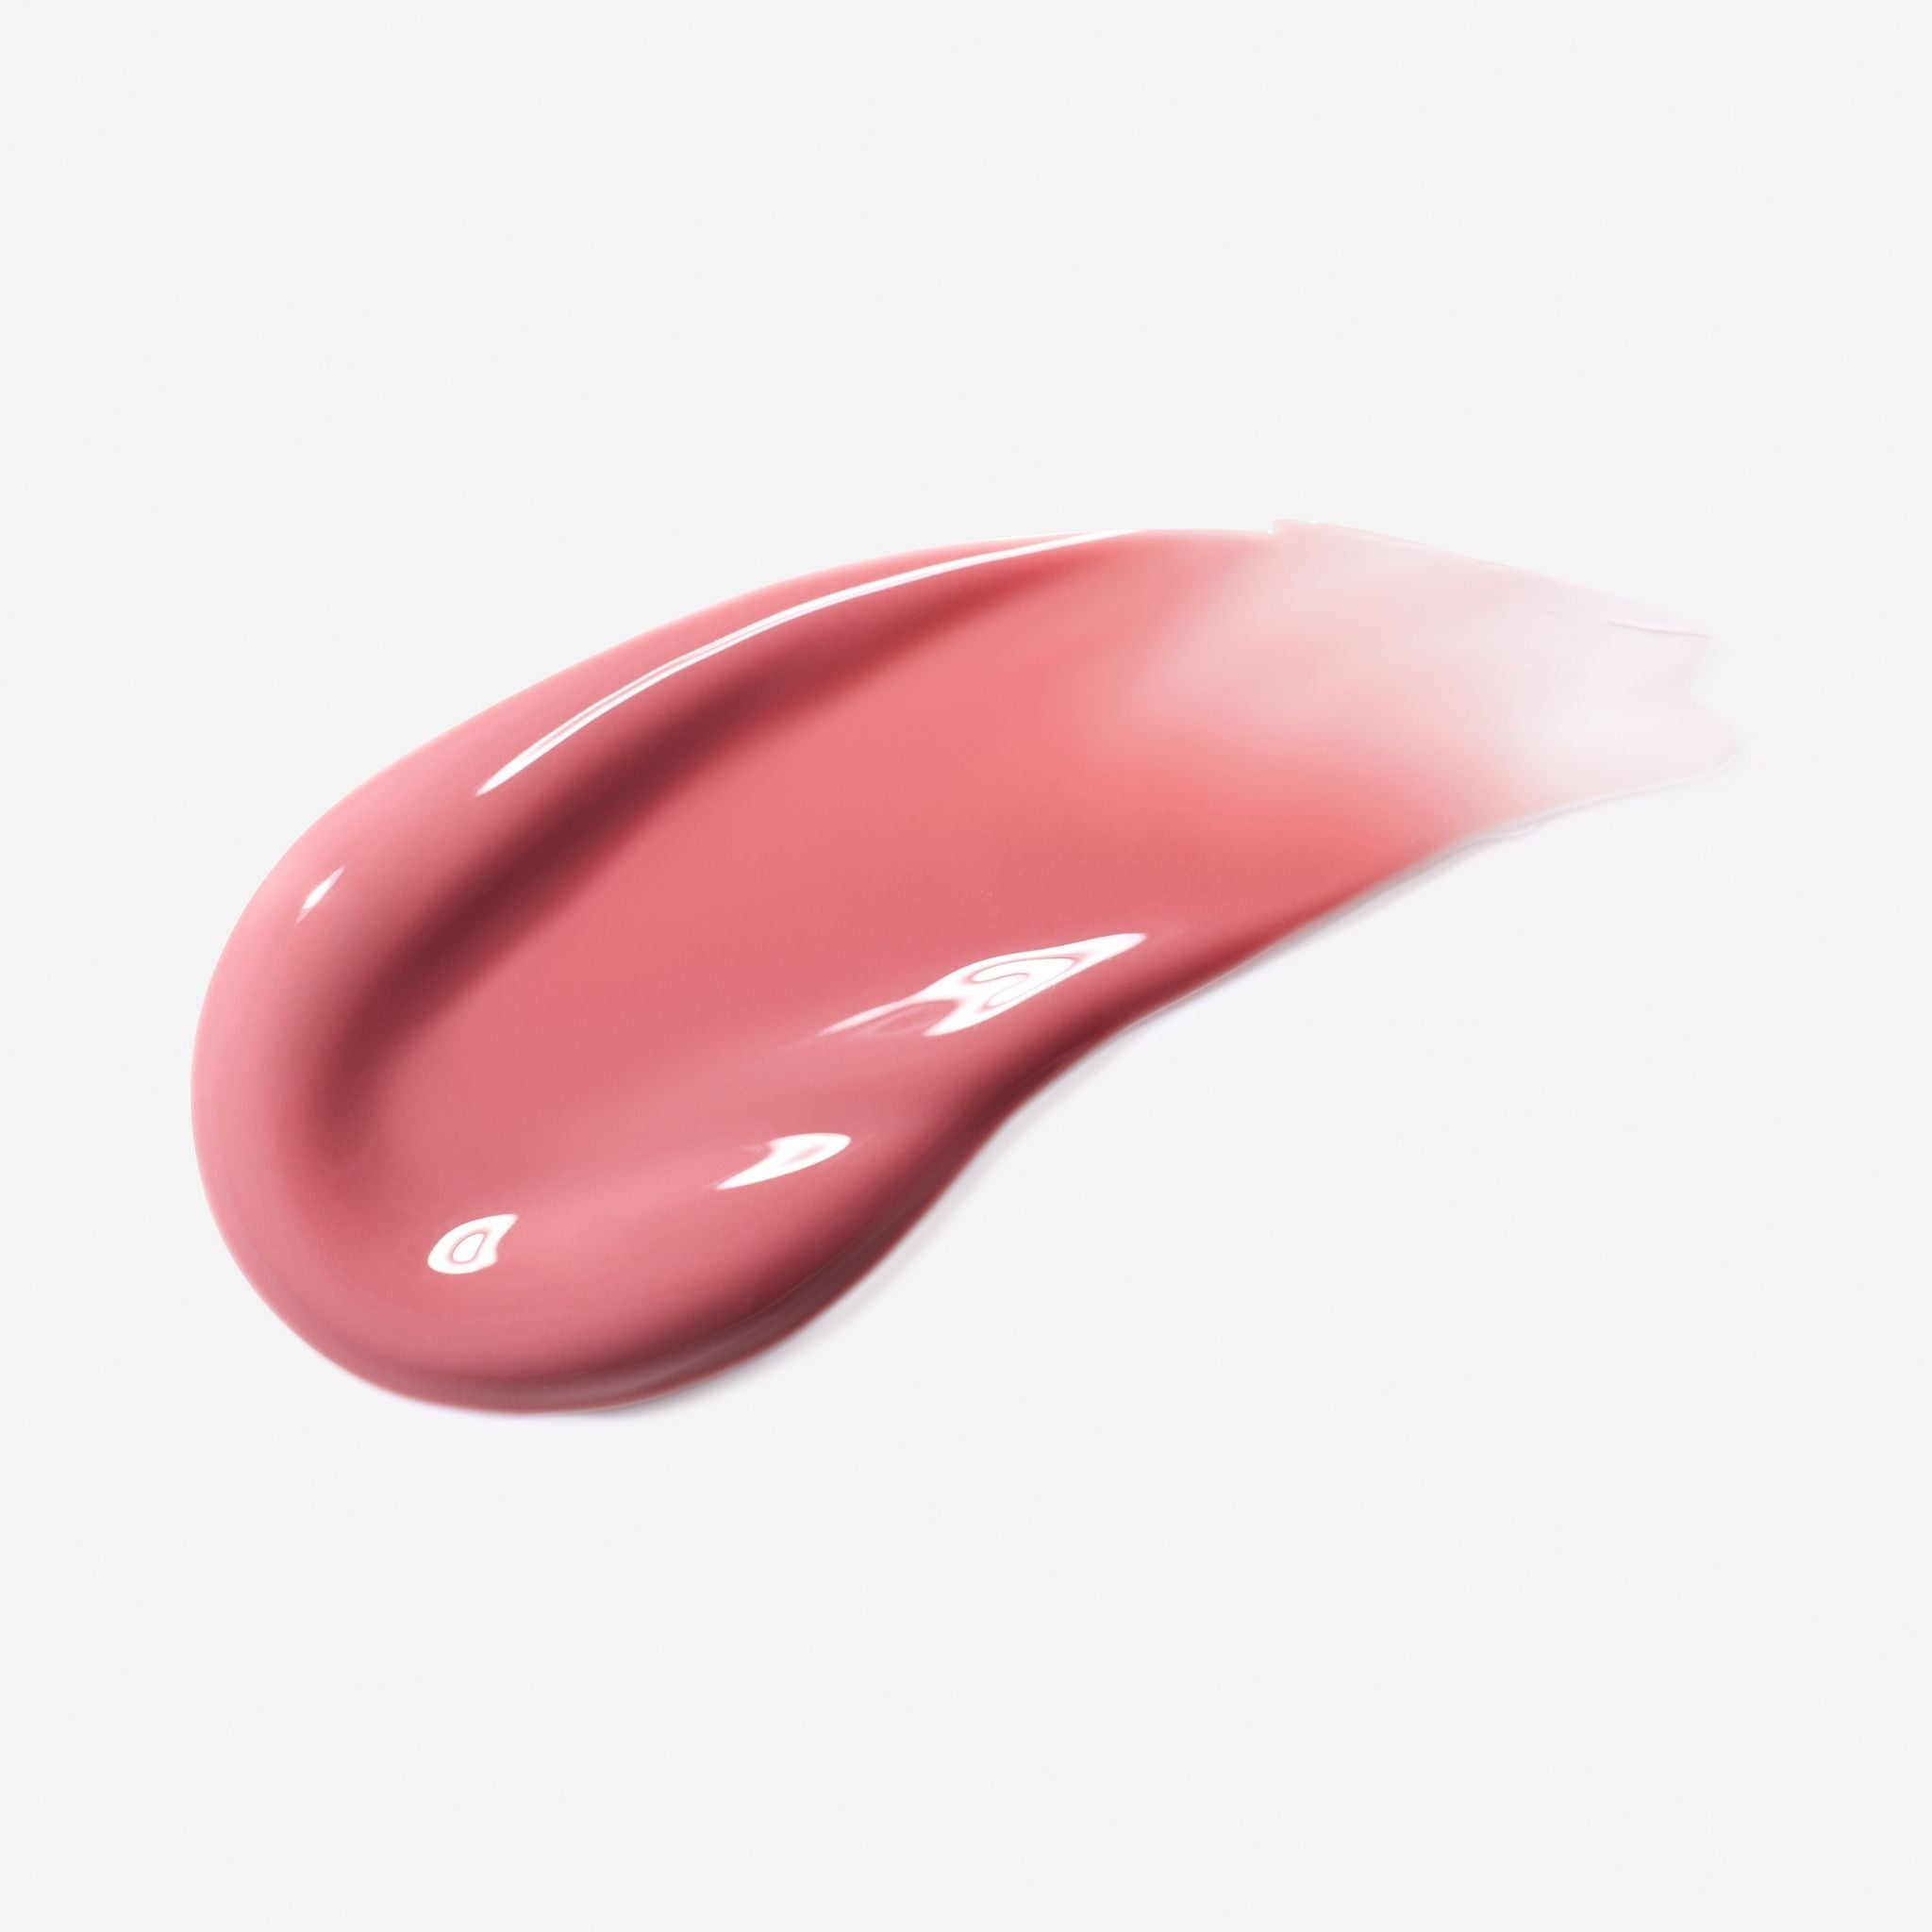 Perfect glob of Hint lip gloss, previously known as beige natural. The ideal nude pink 